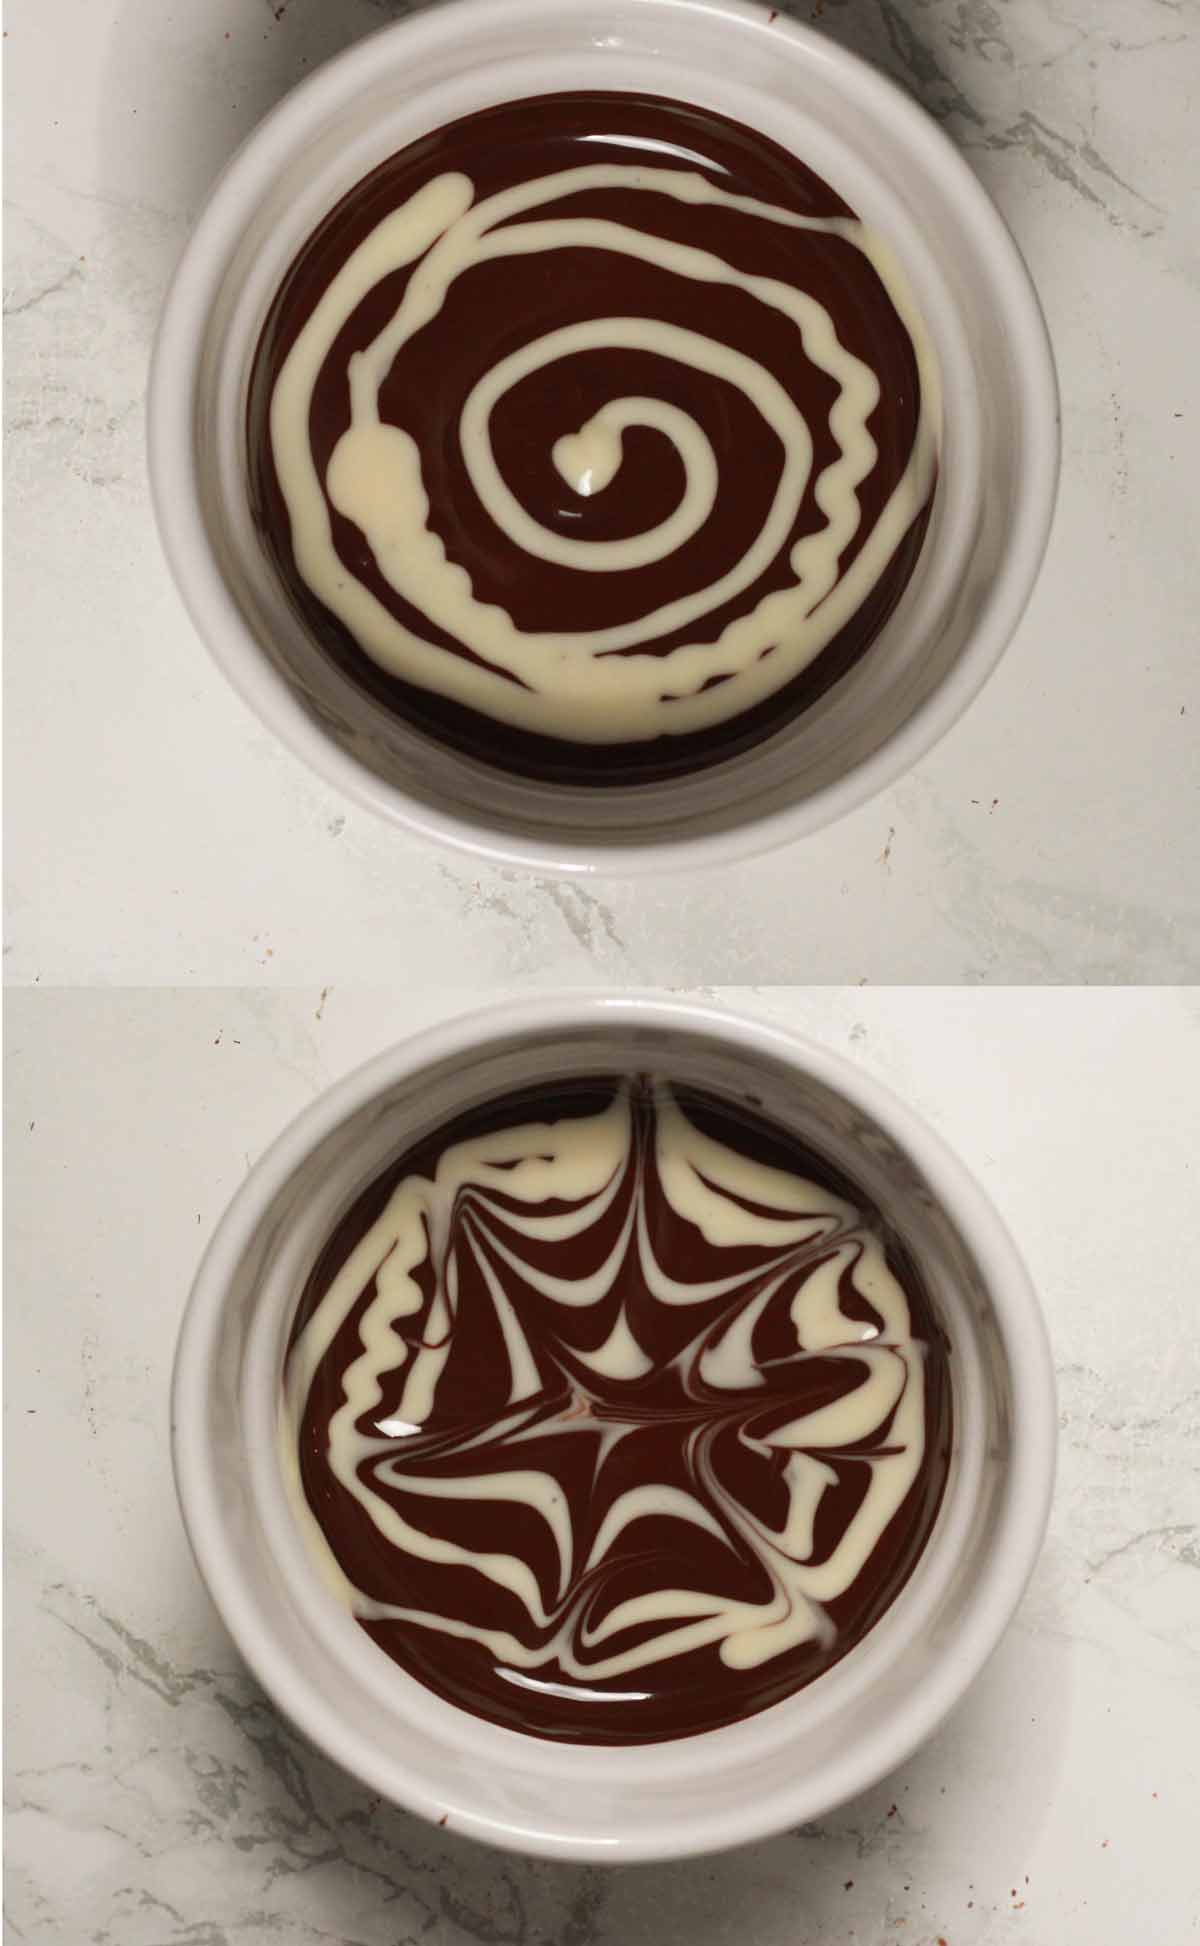 Creating Marbled Chocolate